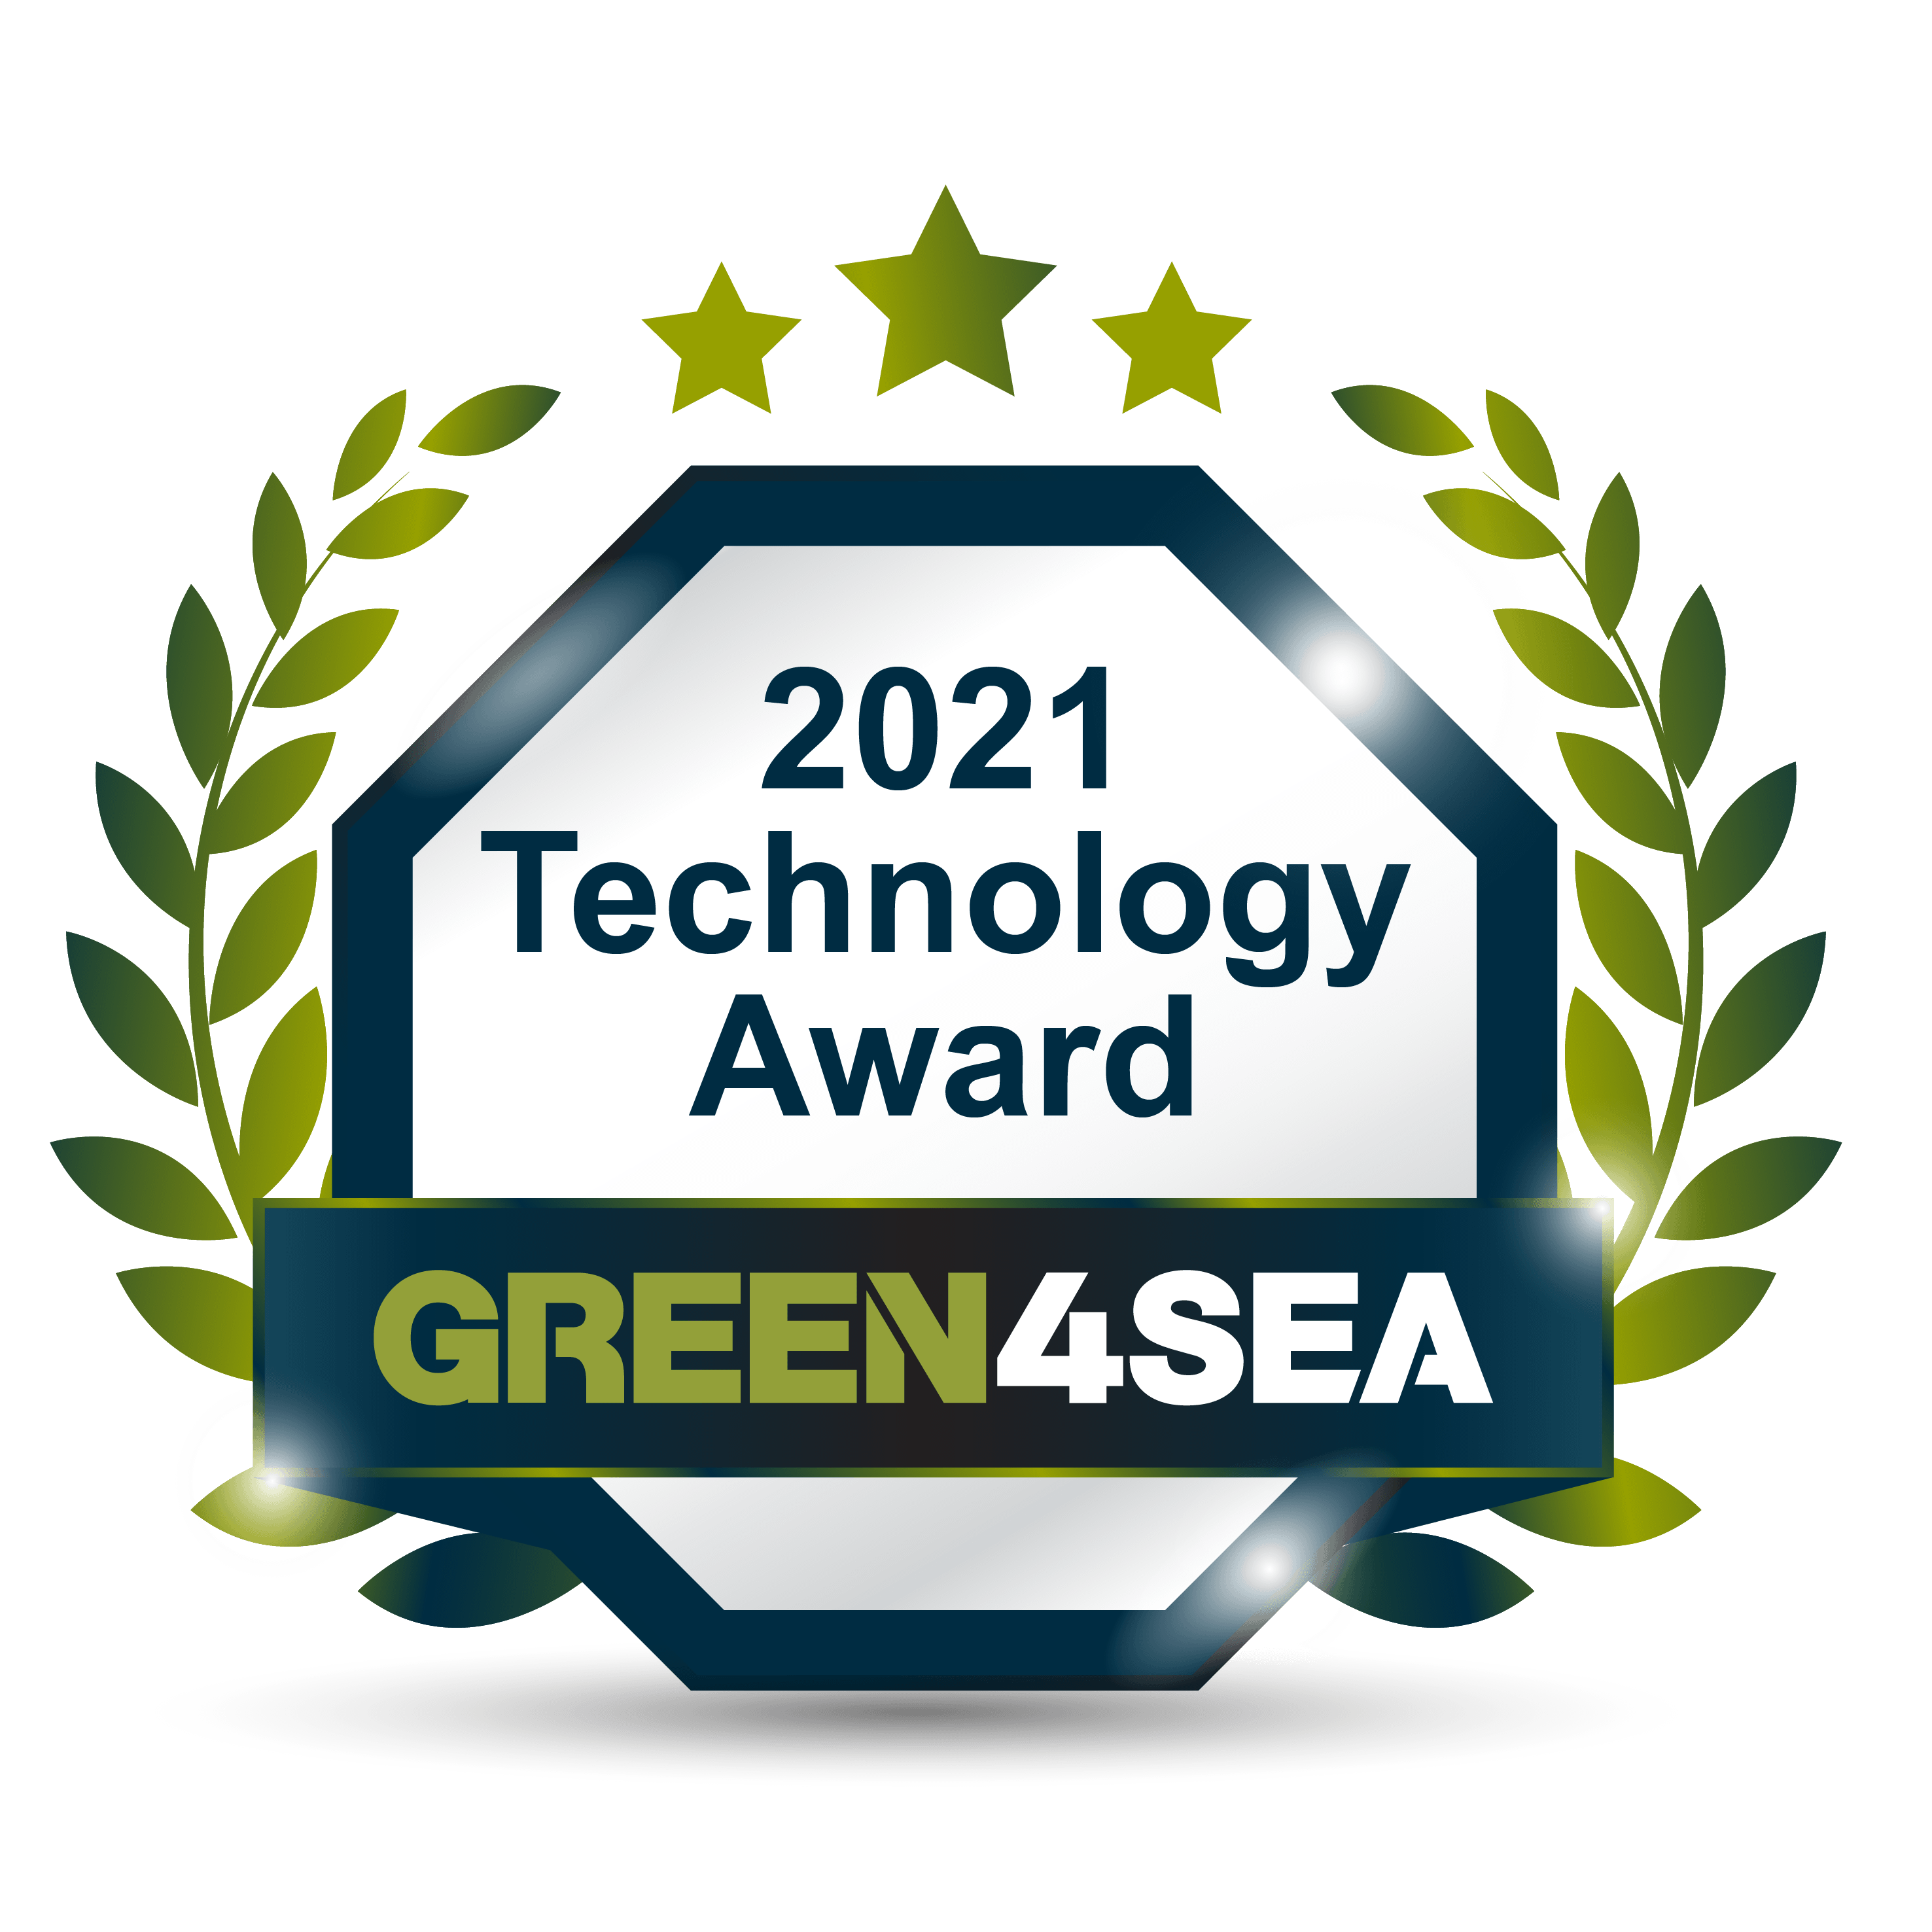 Aquaterras, antifouling paint with a marine-environment friendly formulation awarded the GREEN4SEA Technology Award